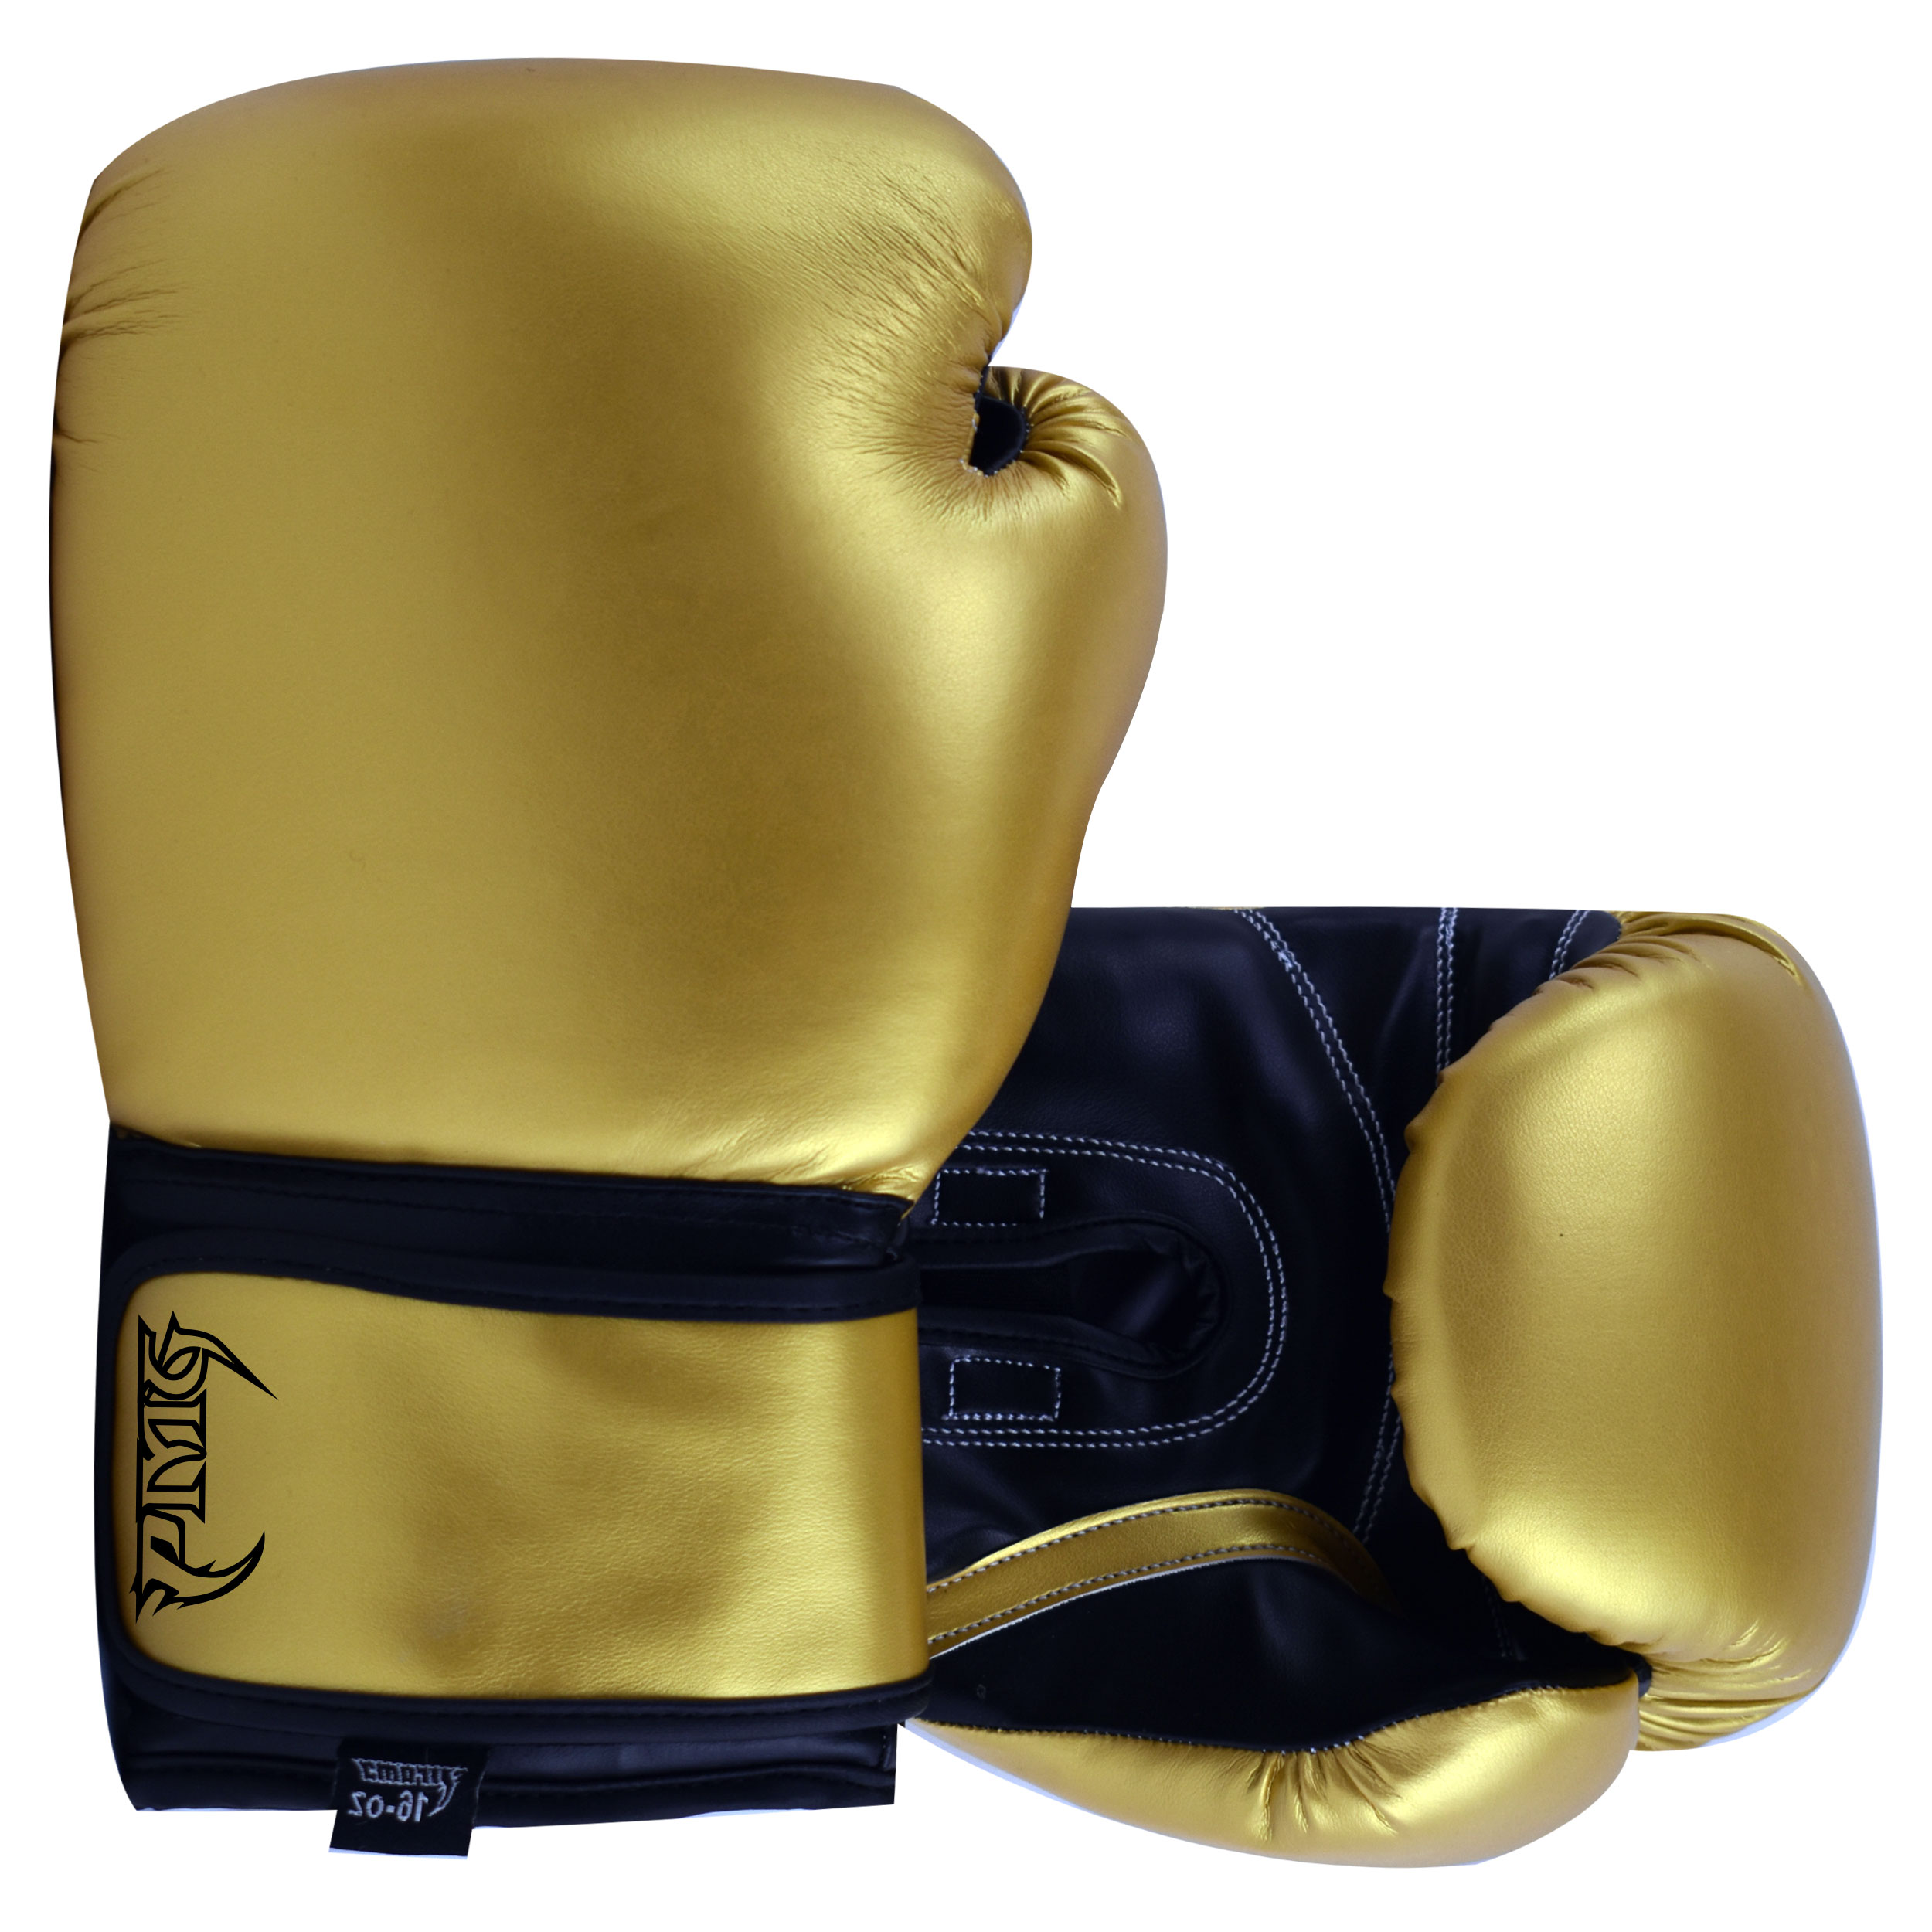 Wearable Baby Boxing Gloves Black With Gold Cuff